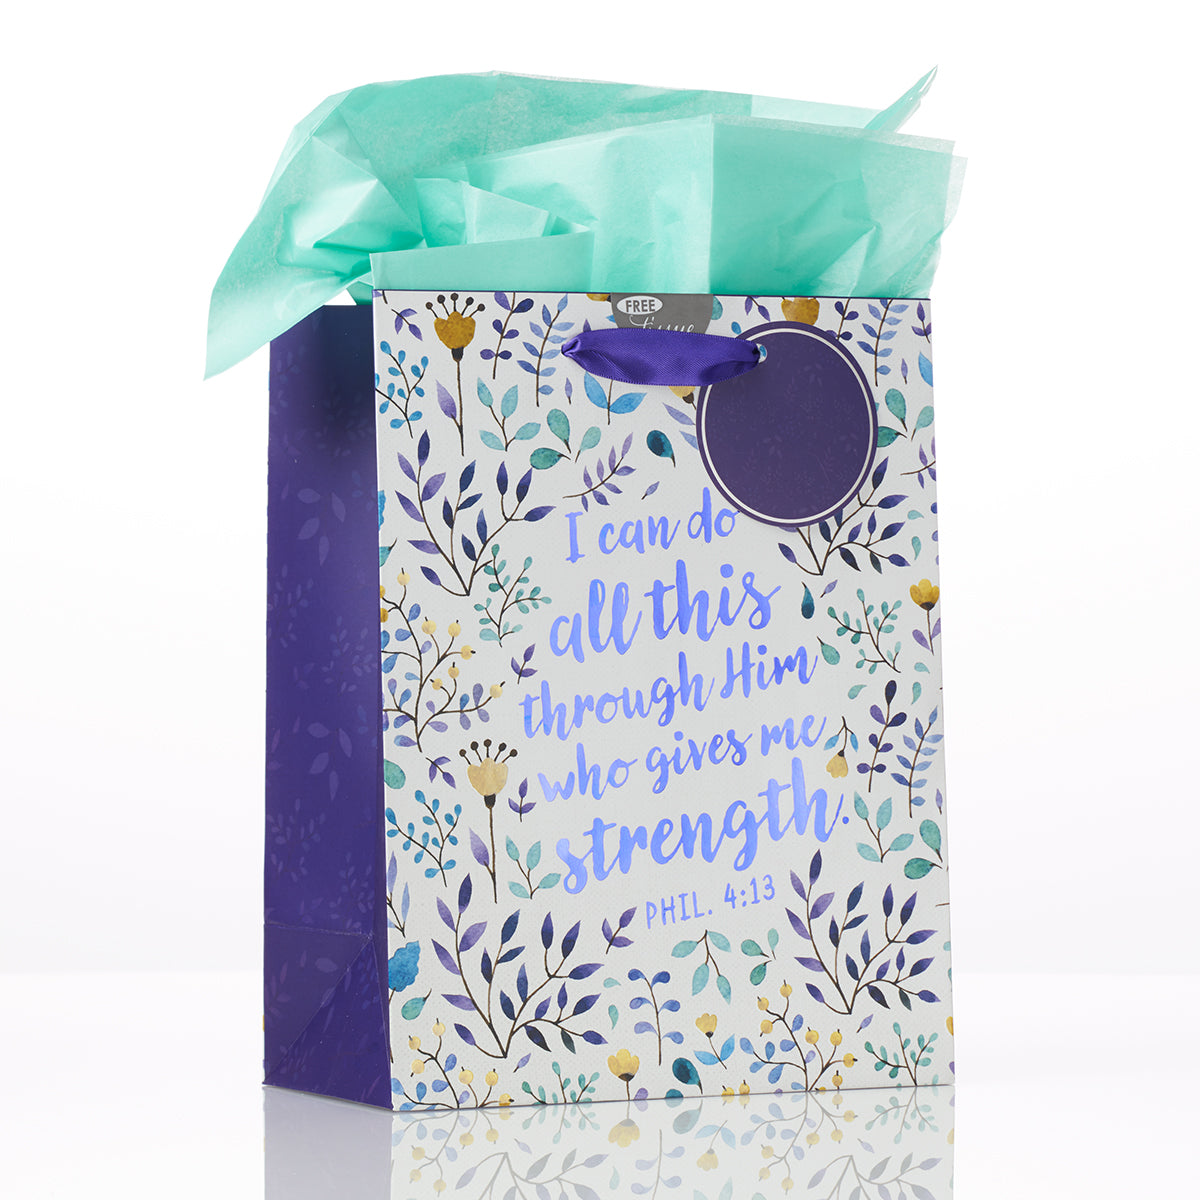 I Can Do All This - Phil 4:13 Medium Gift Bag - The Christian Gift Company